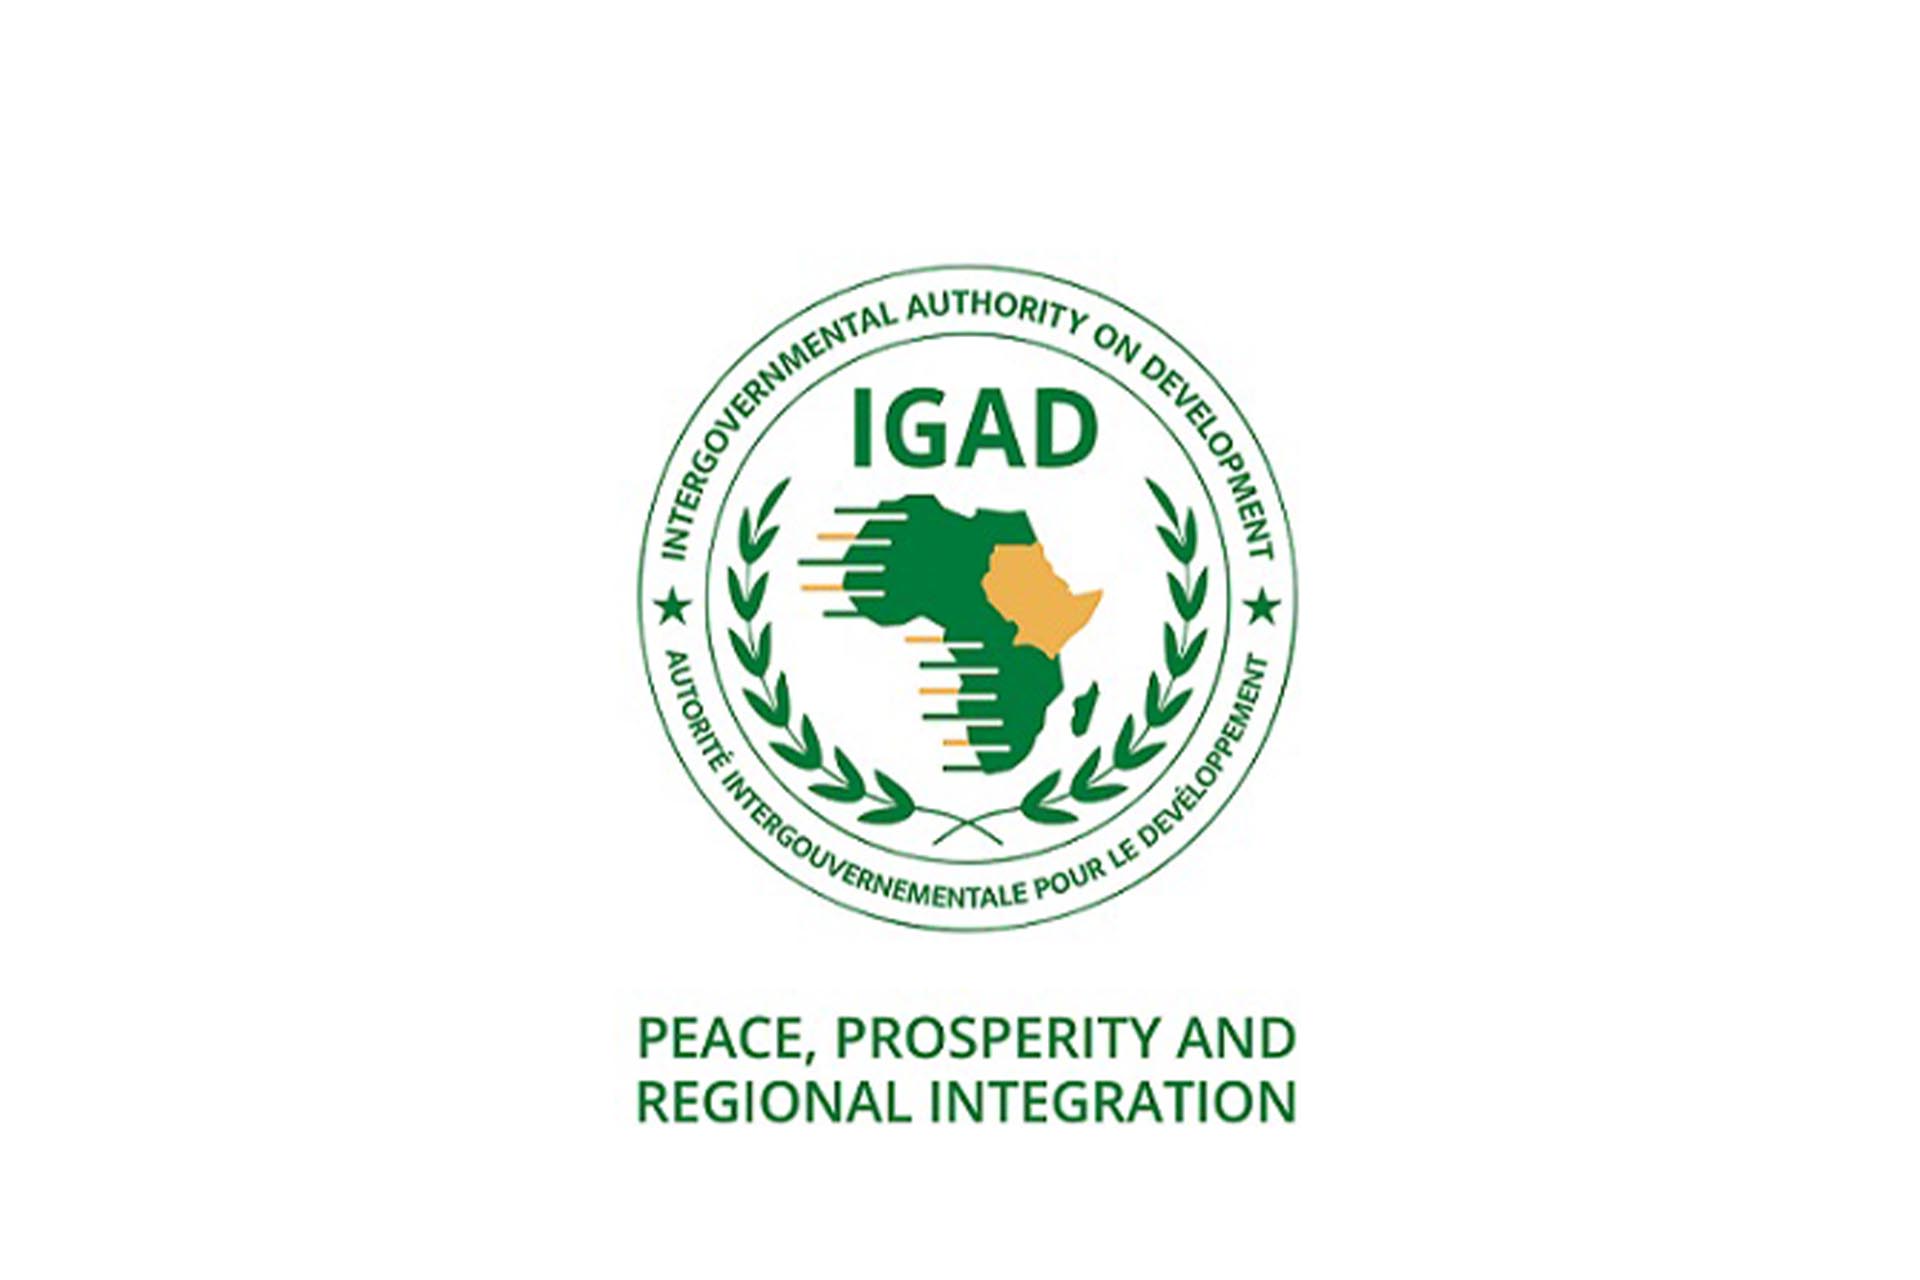 IGAD’s Conflict Early Warning and Response Mechanism - CEWARN